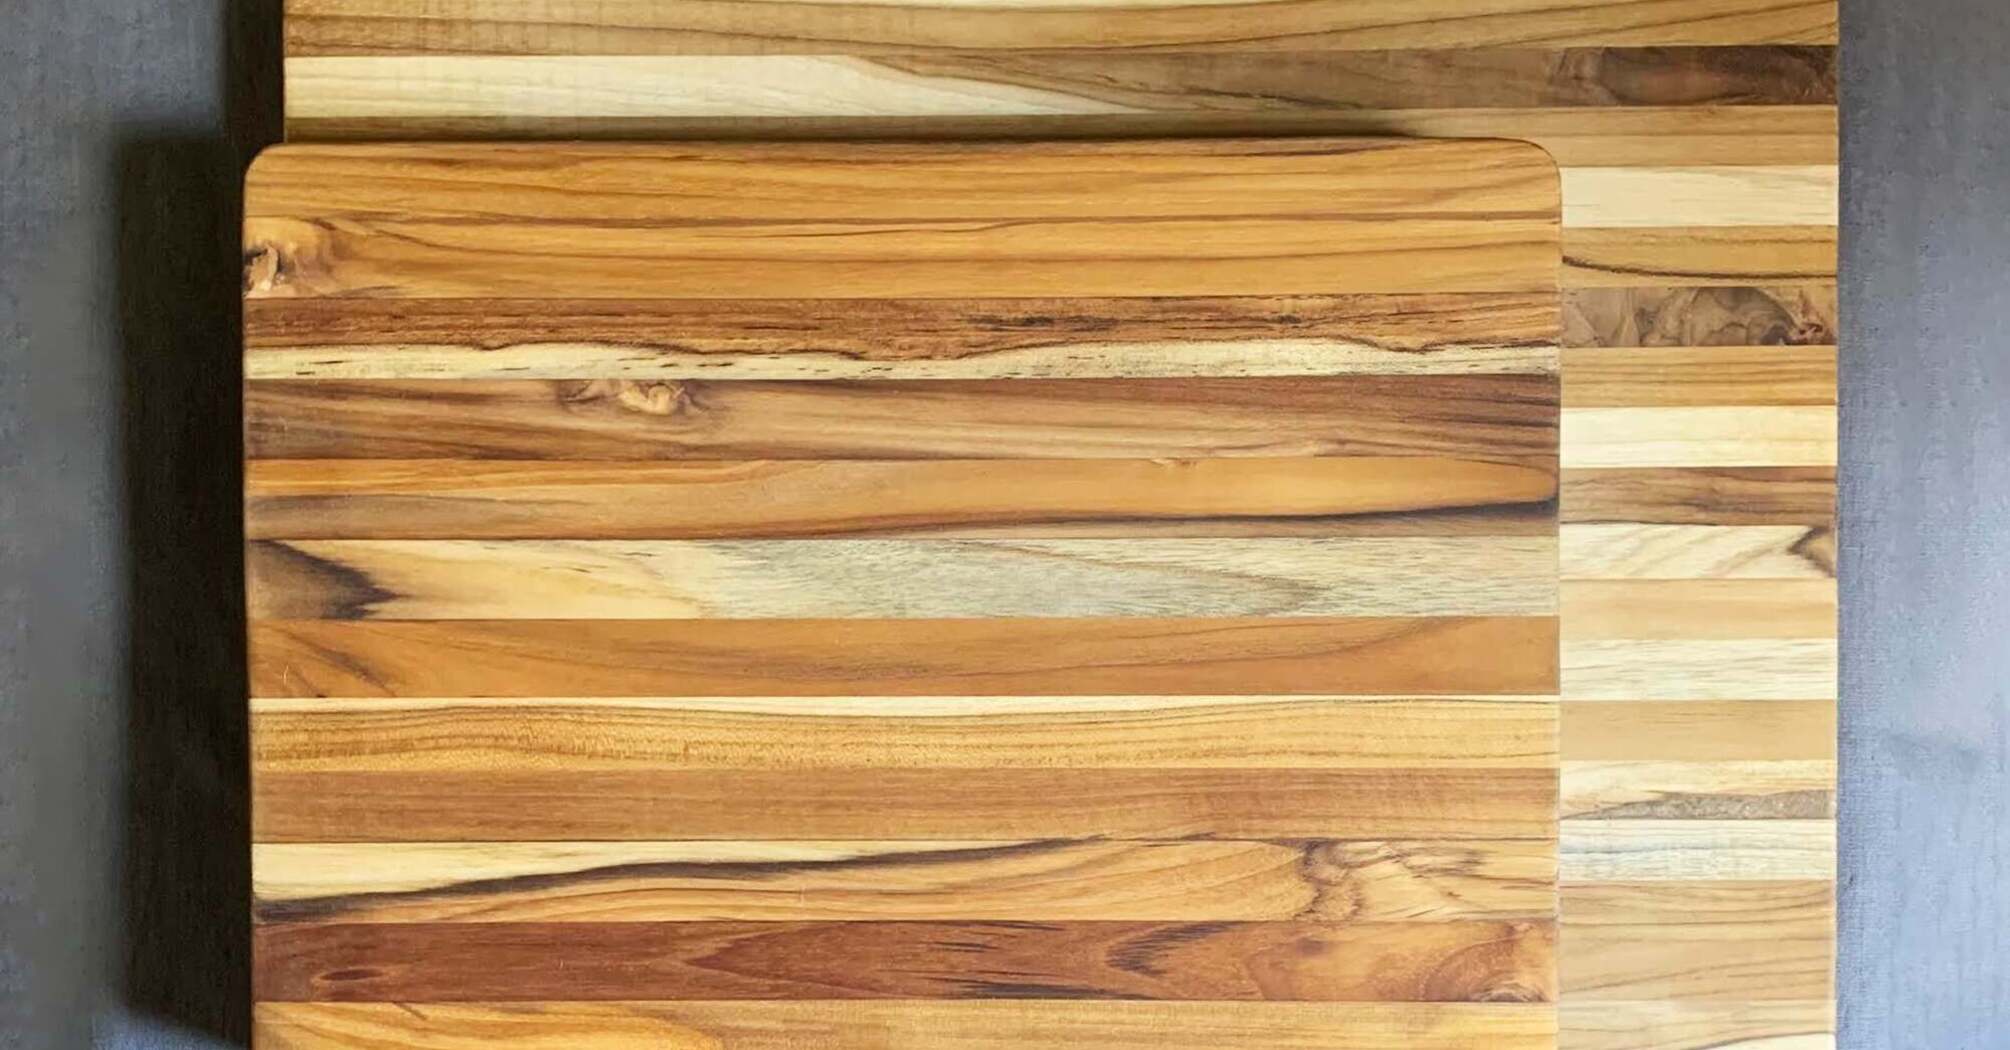 How to properly clean wooden kitchen boards